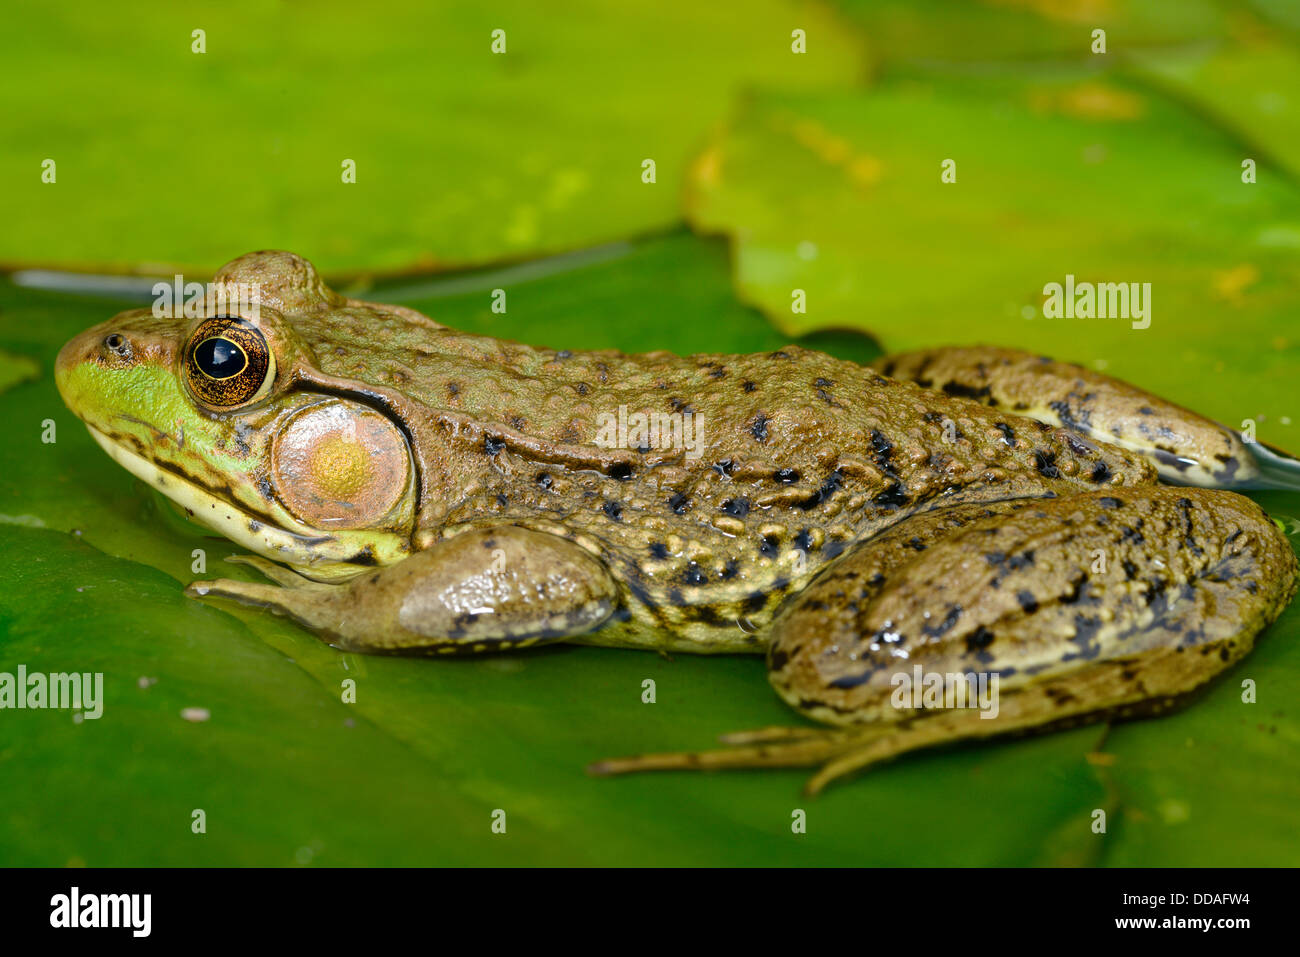 Close up of green frog in pond on a water lily pad with mosquito biting rear end Stock Photo